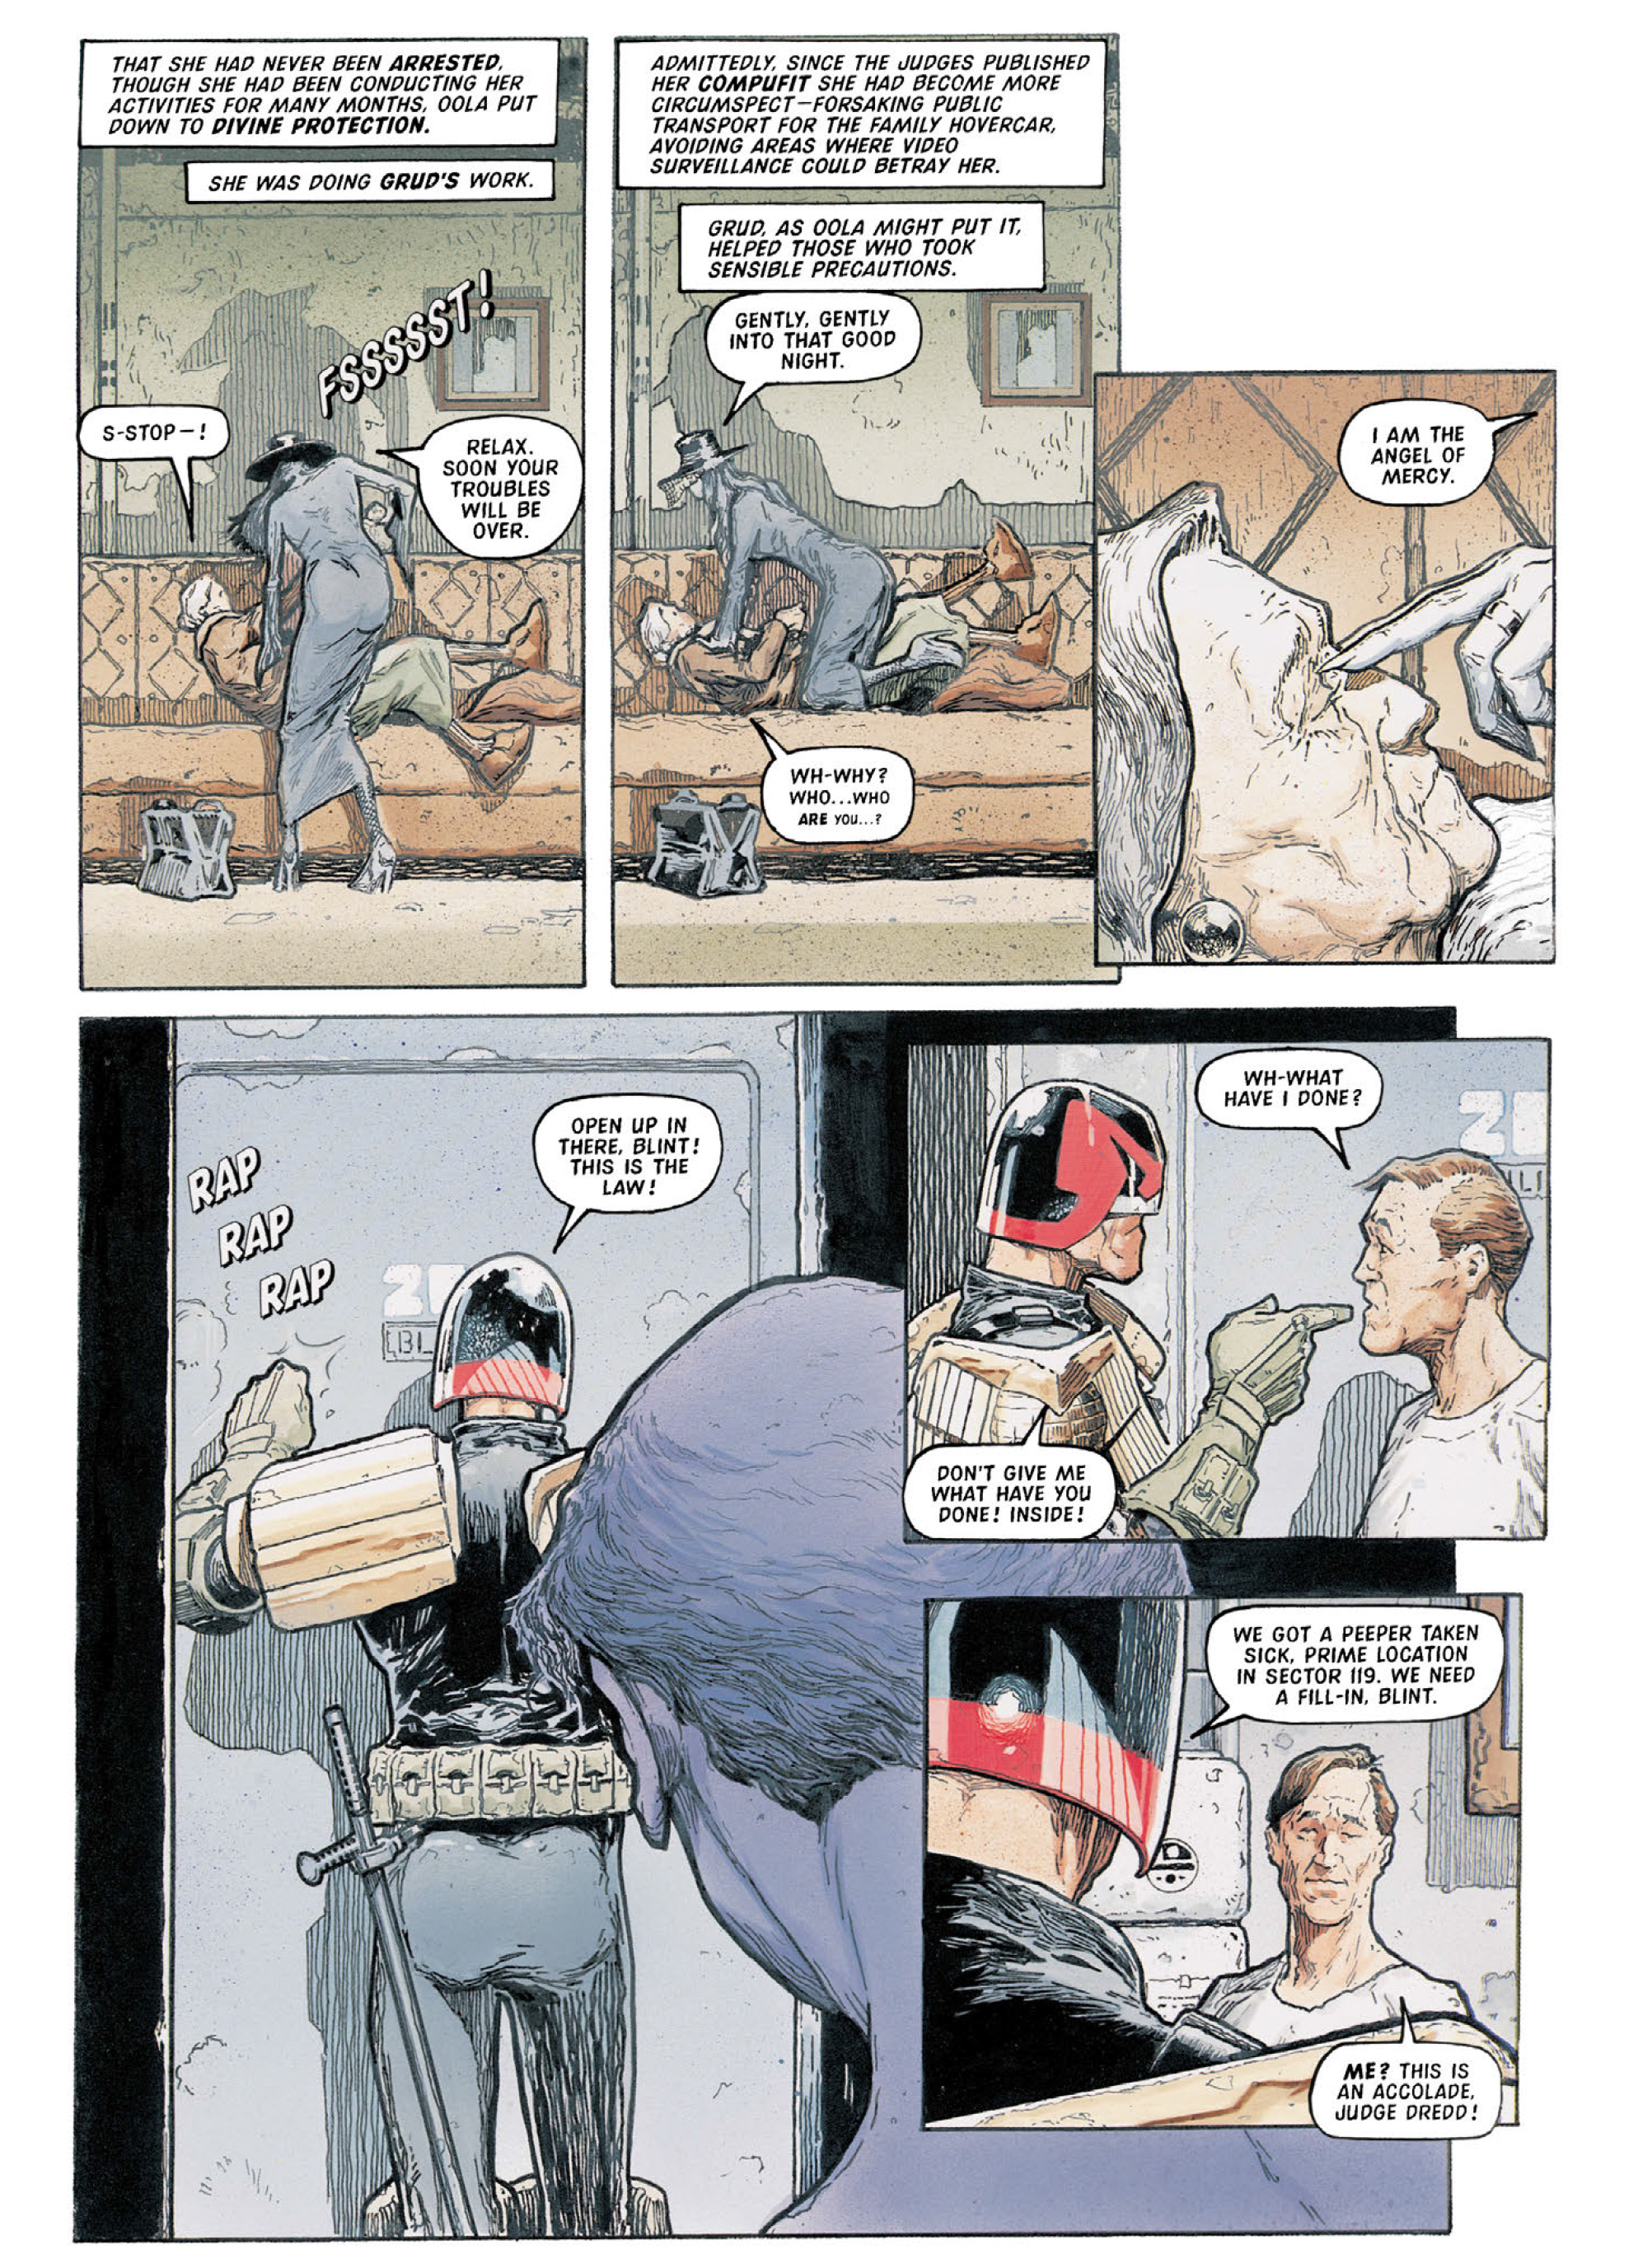 Read online Judge Dredd: The Complete Case Files comic -  Issue # TPB 28 - 49